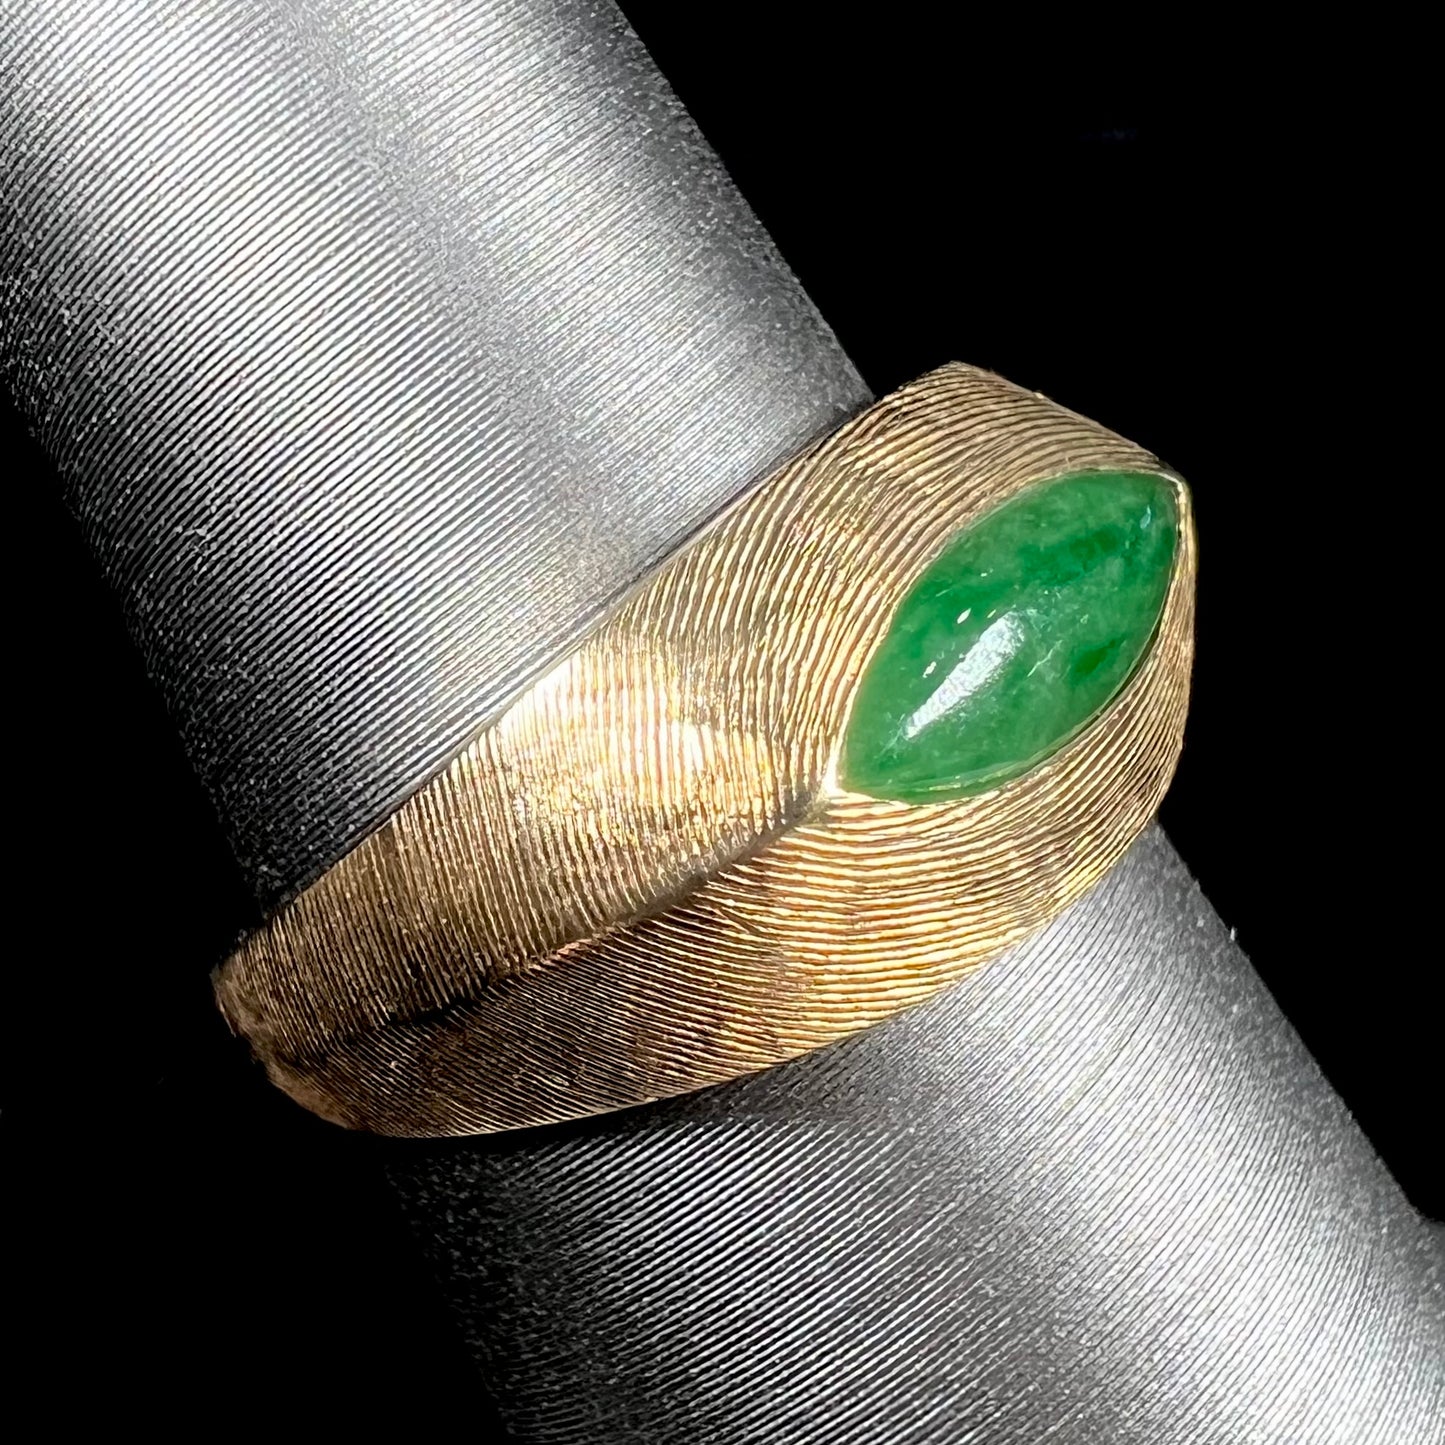 A textured yellow gold ring set with a marquise cabochon cut green jadeite stone.